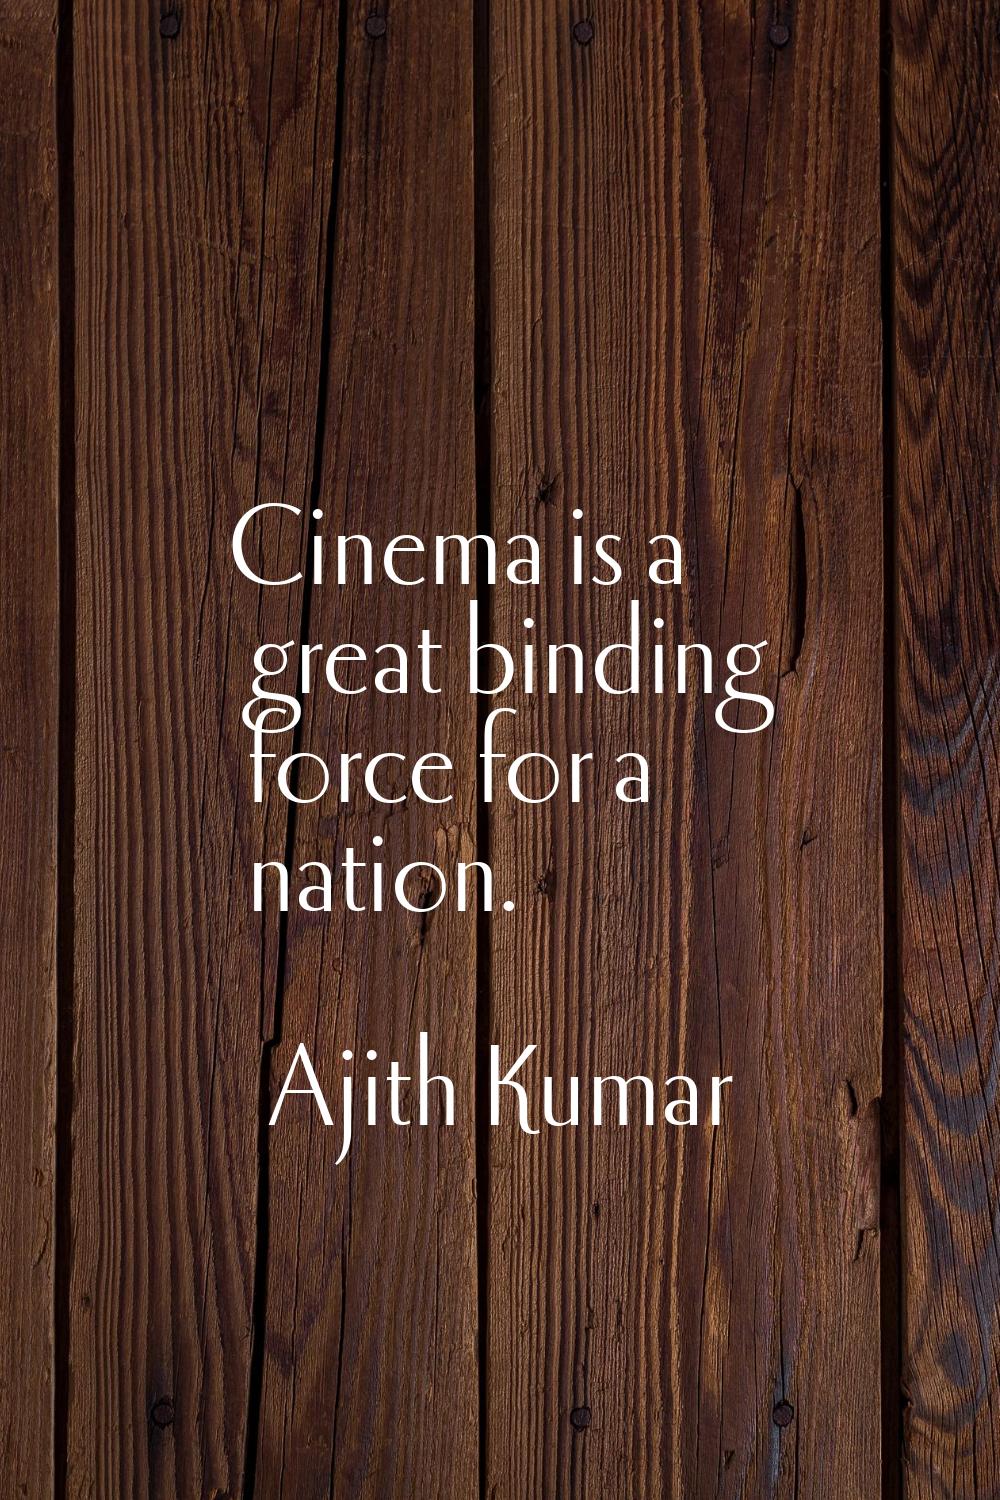 Cinema is a great binding force for a nation.